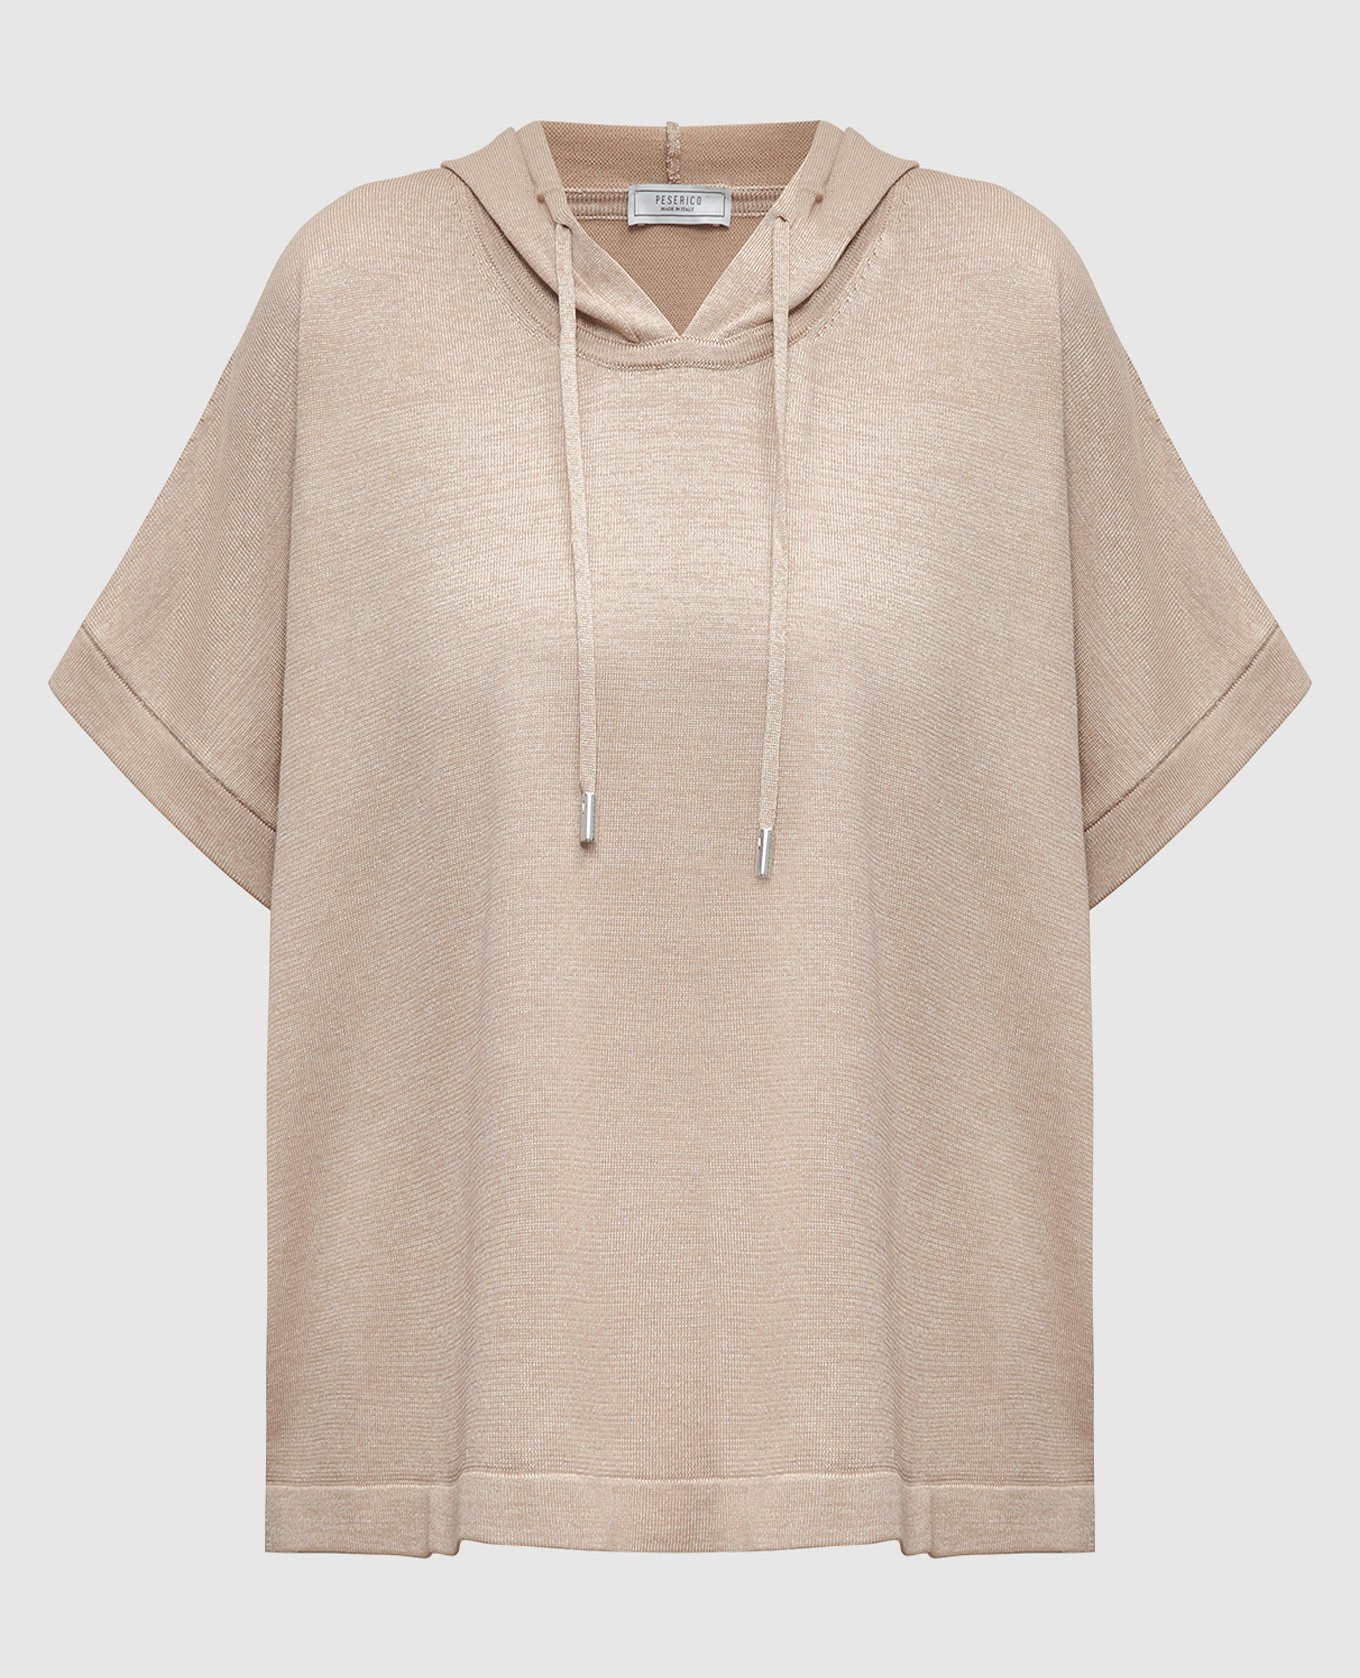 Beige top with a hood